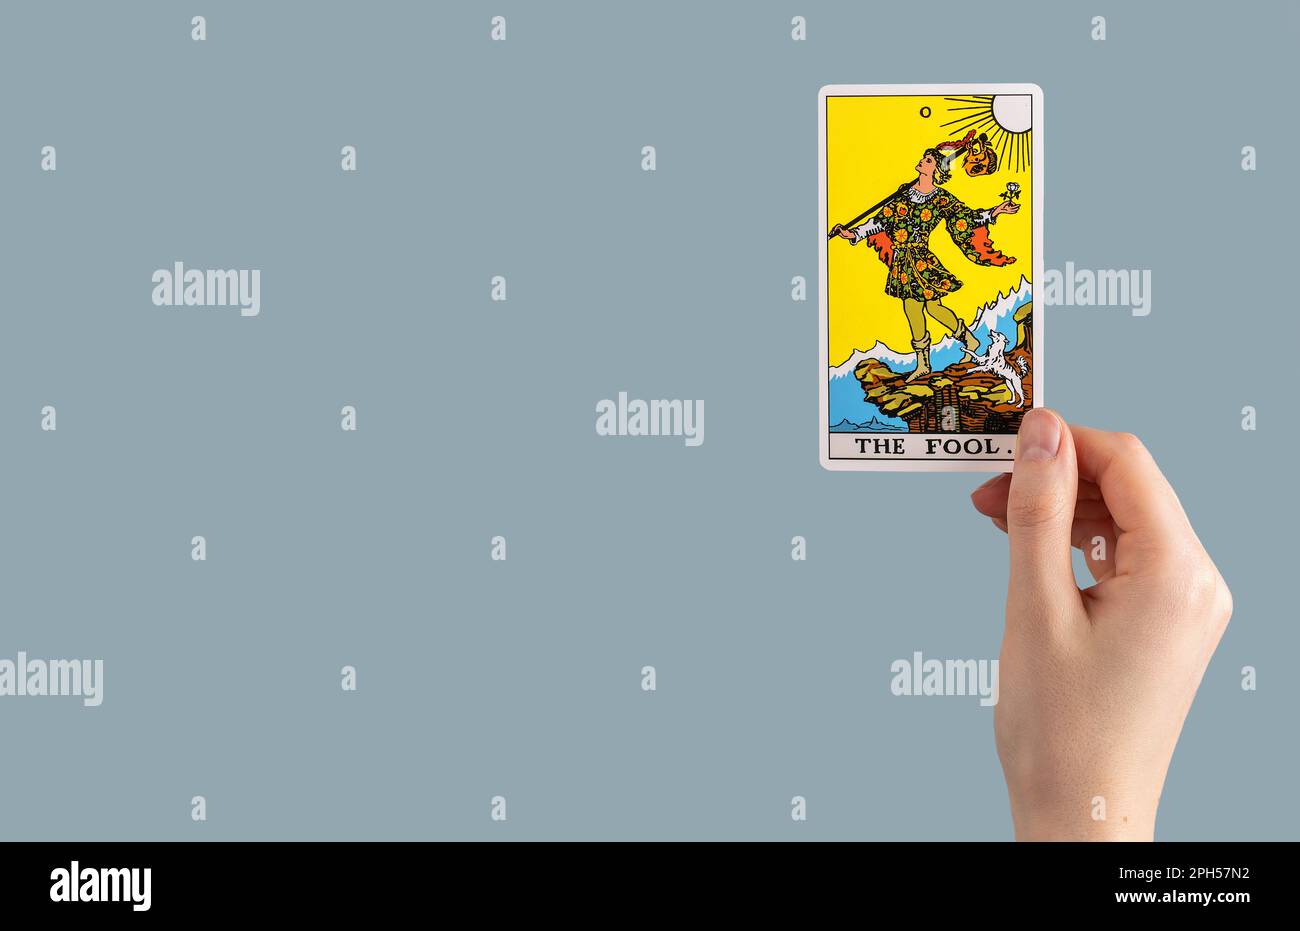 The Fool, tarot card in hand. Banner background with copy space for text. Stock Photo